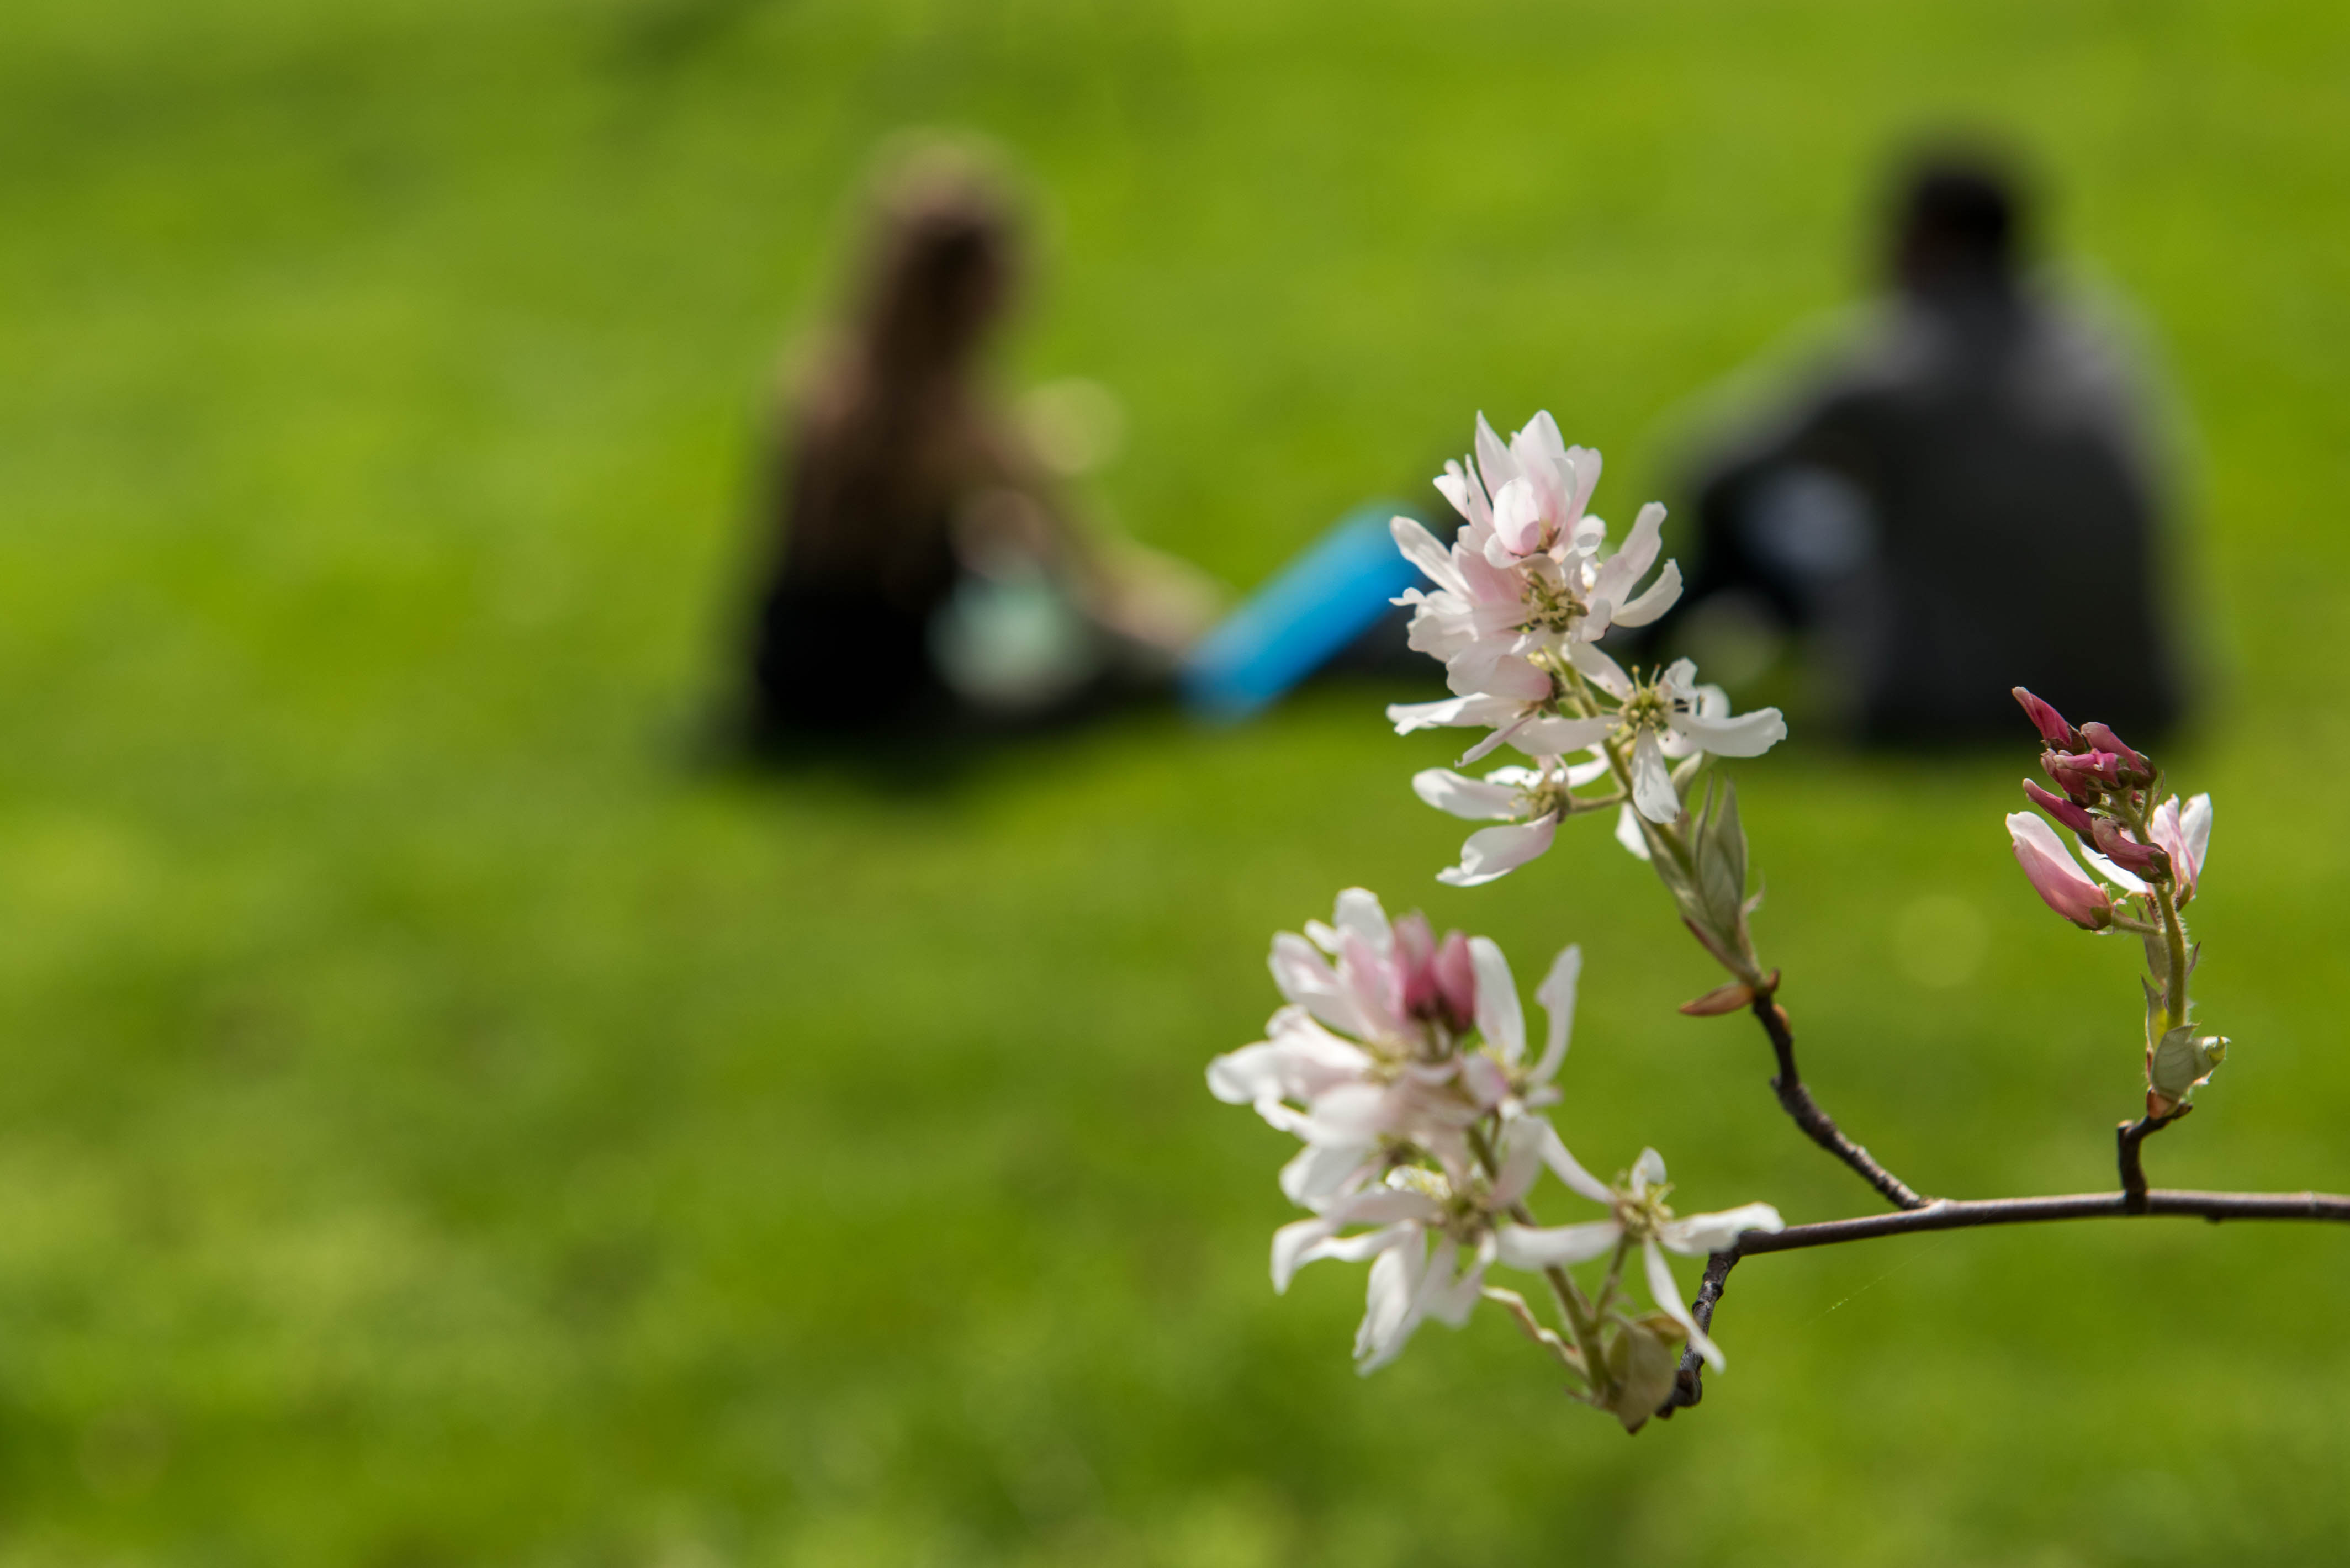 Image of two students sitting on the grass in the background with the focus on a plant in bloom in the foreground. 